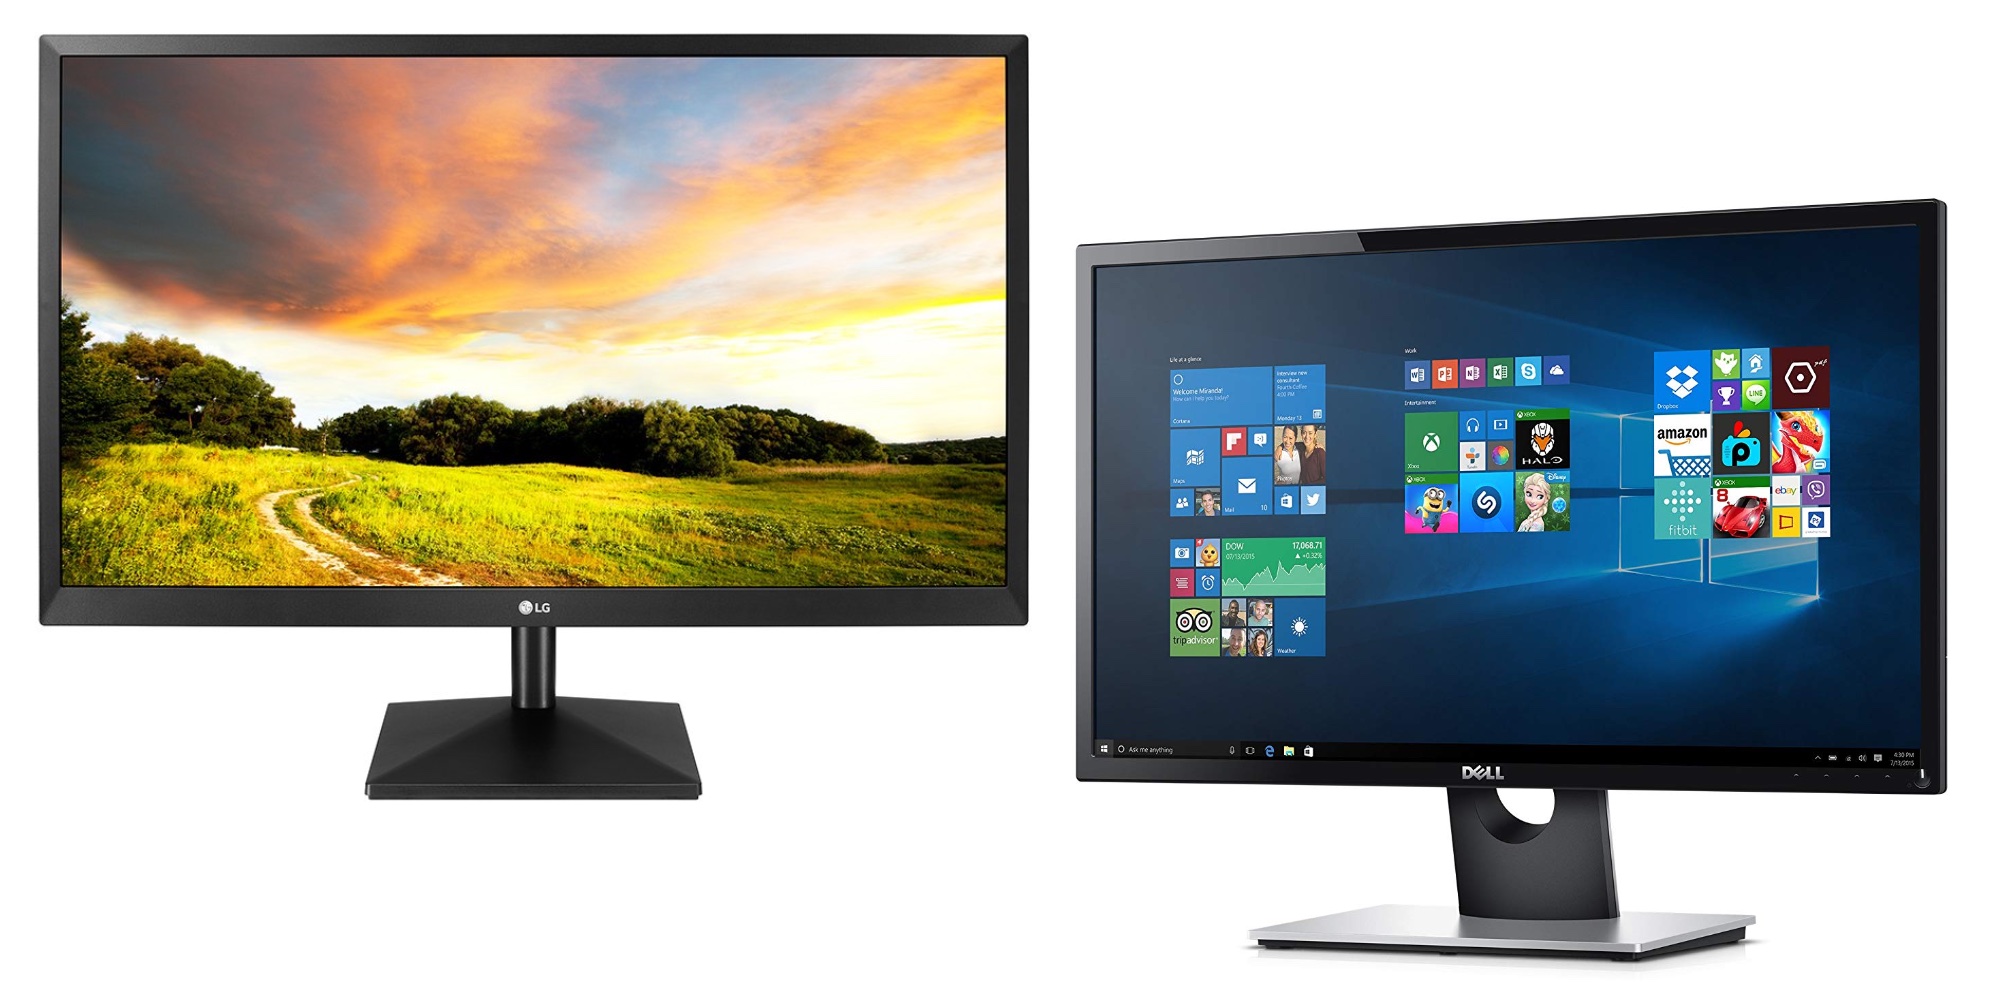 Add a 27-inch 1080p LG Monitor to your desk setup for $100 (Save